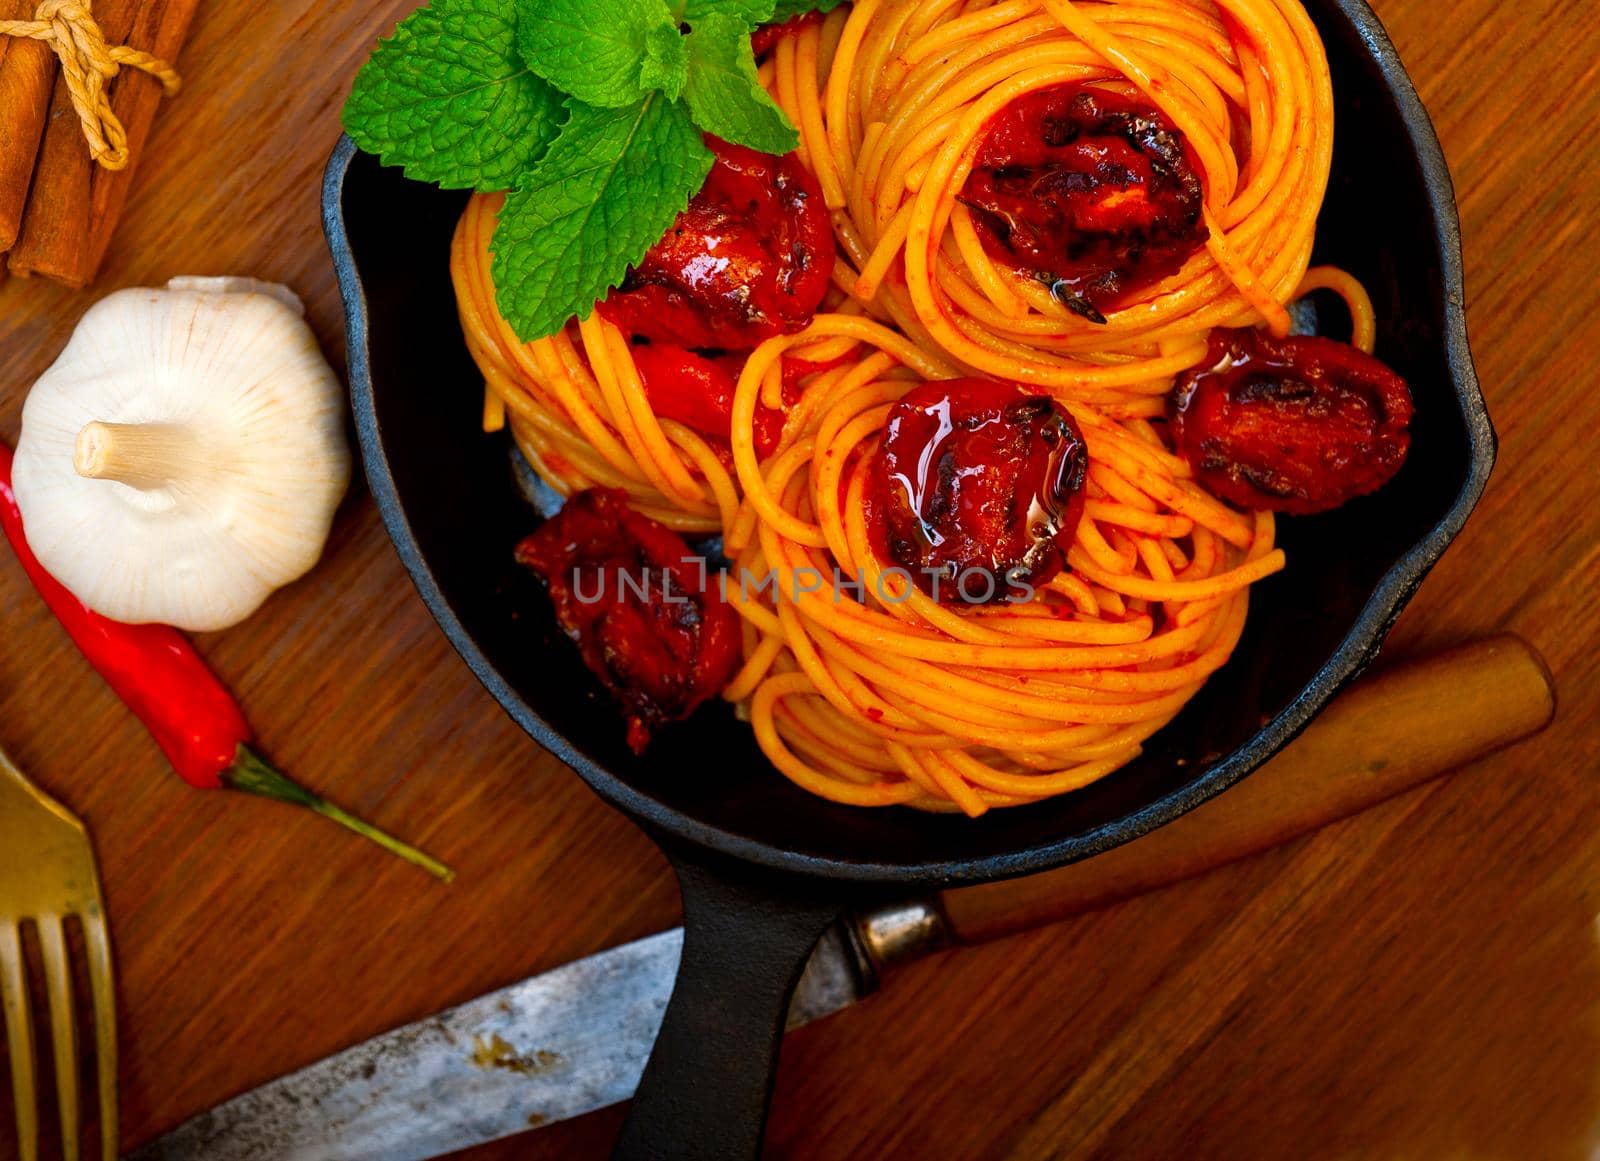 italian spaghetti pasta and tomato with mint leaves  by keko64